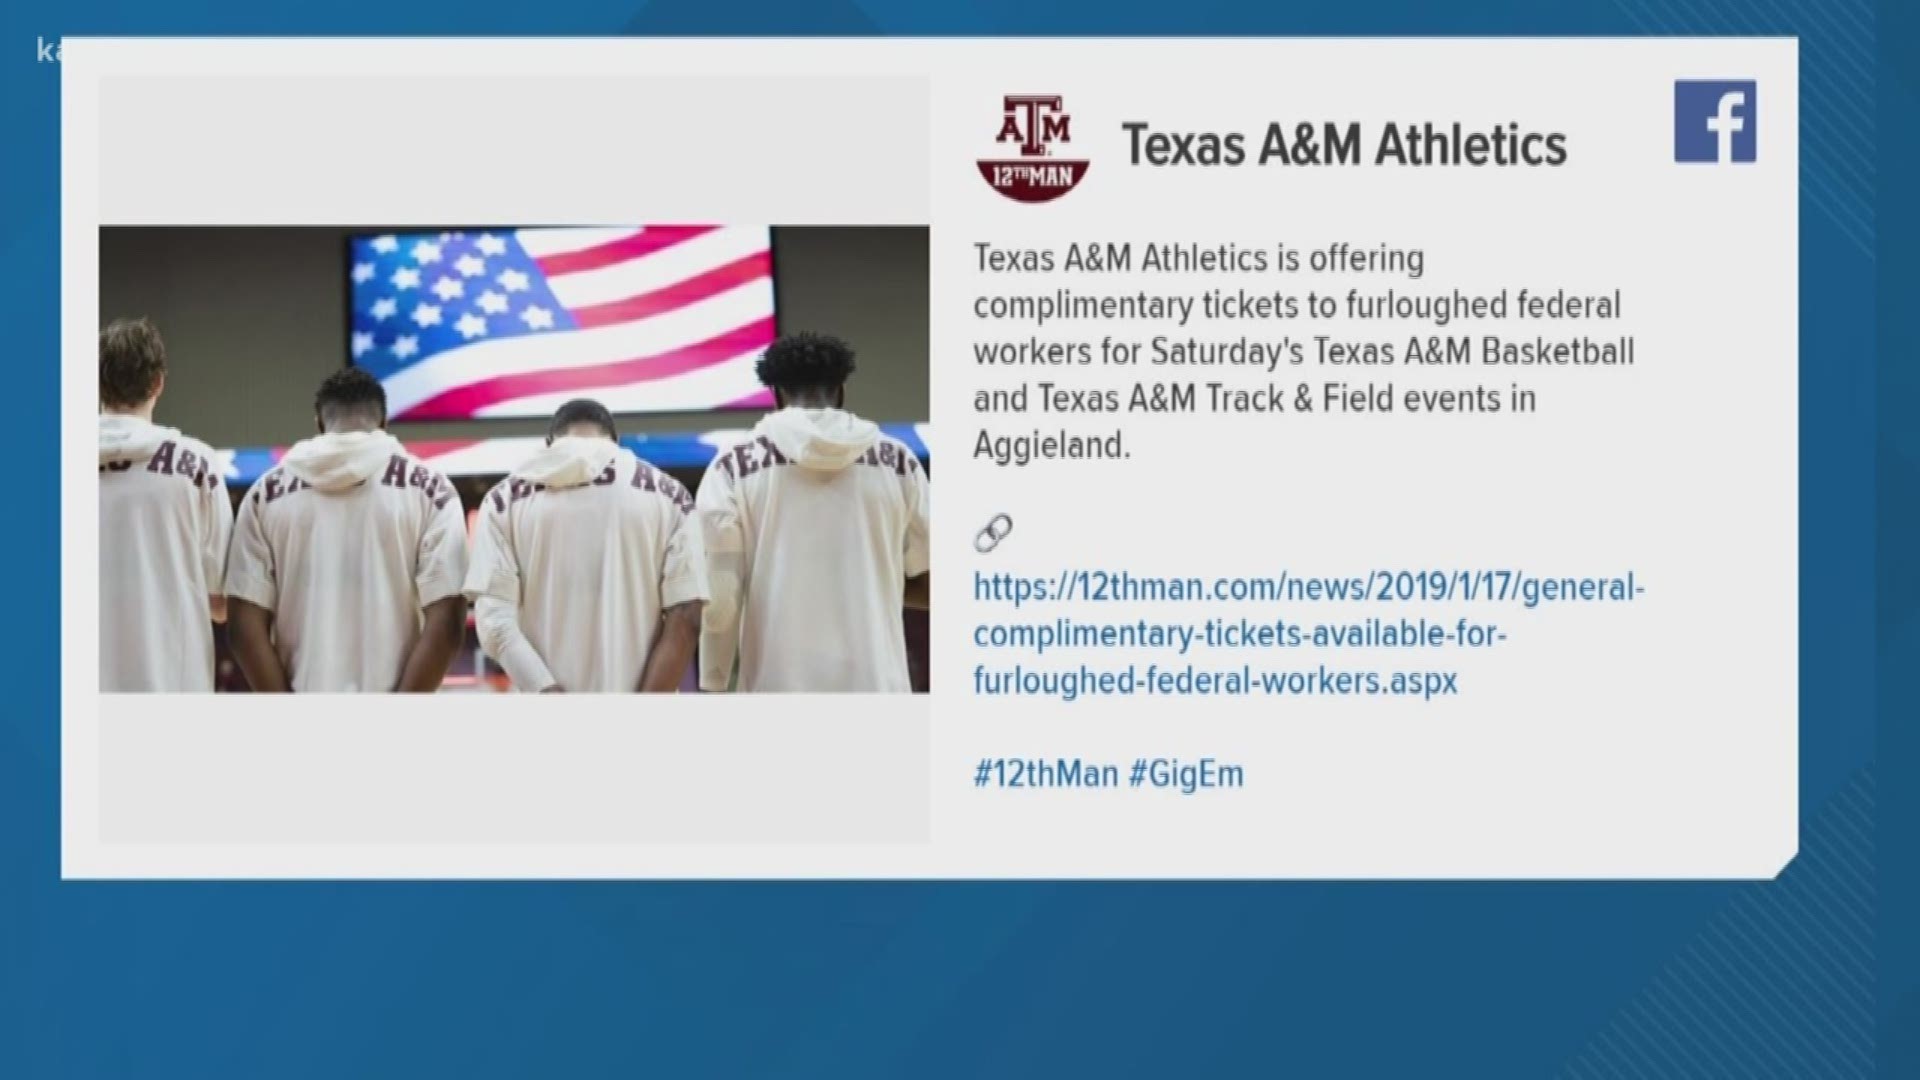 Texas A&M Athletics department is offering government workers complimentary tickets to Saturday's events.